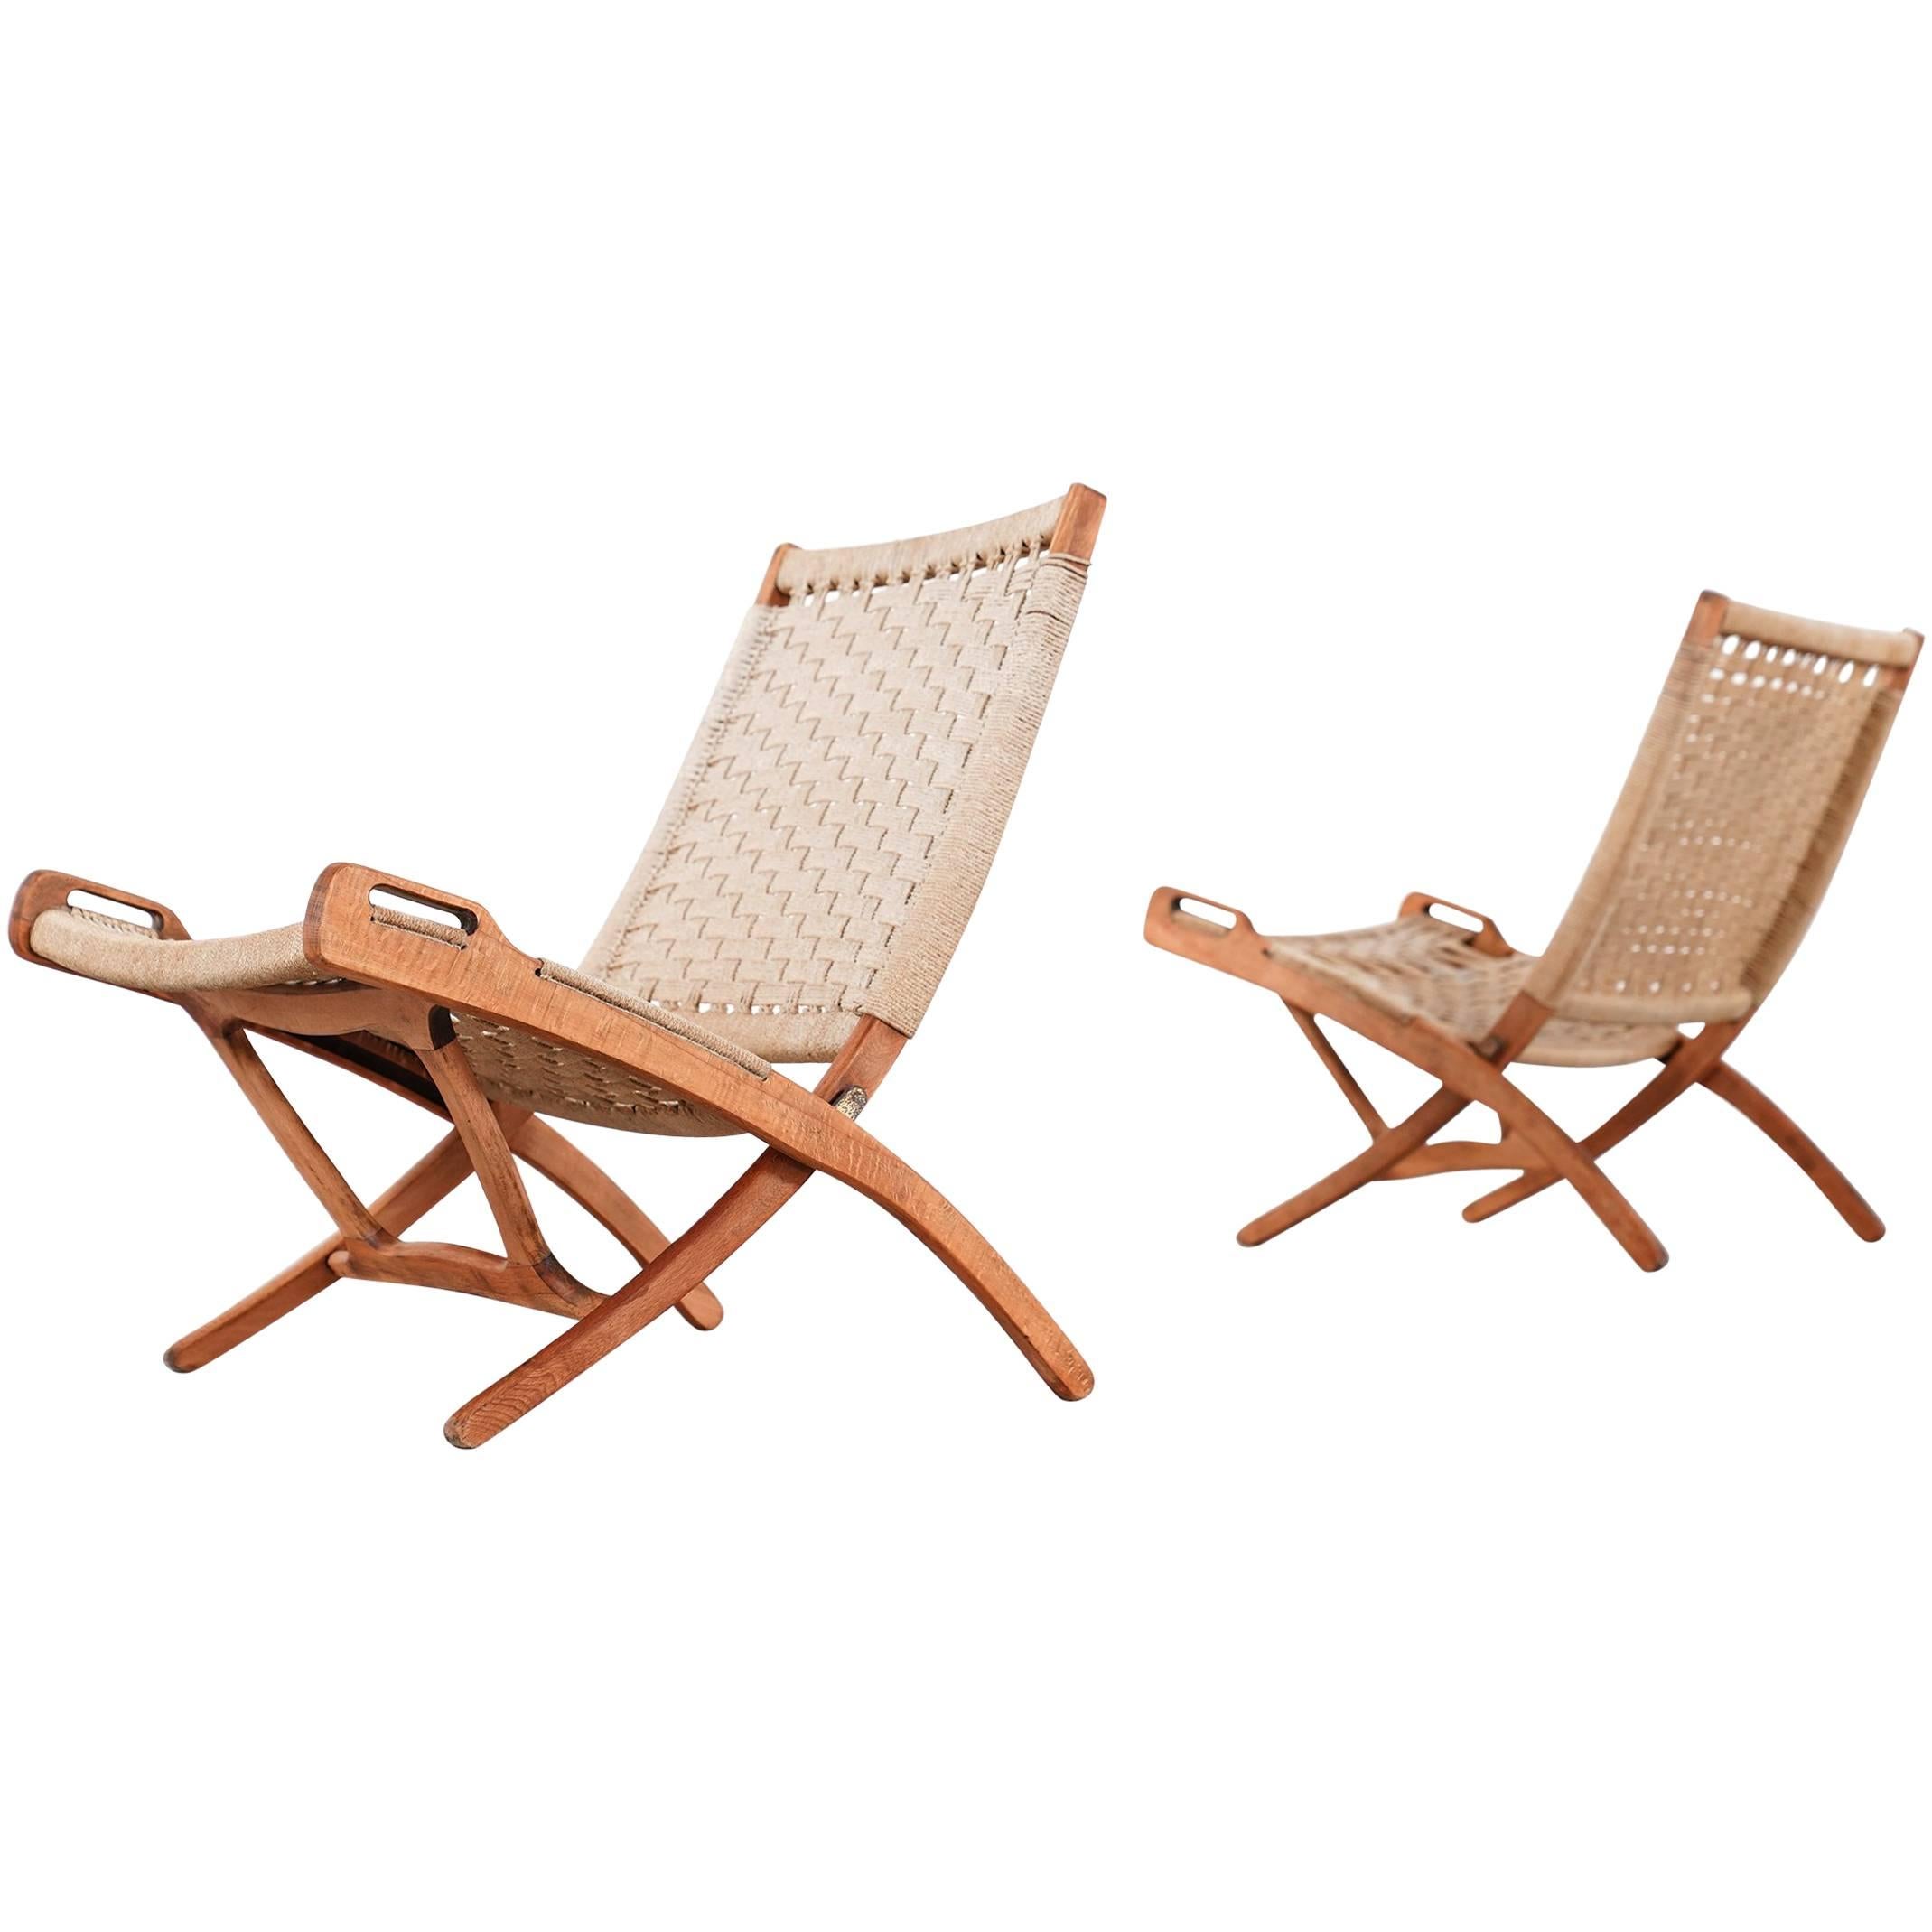 Folding Chair, Hans J. Wegner Style, Wood and Rope Covering, circa 1960